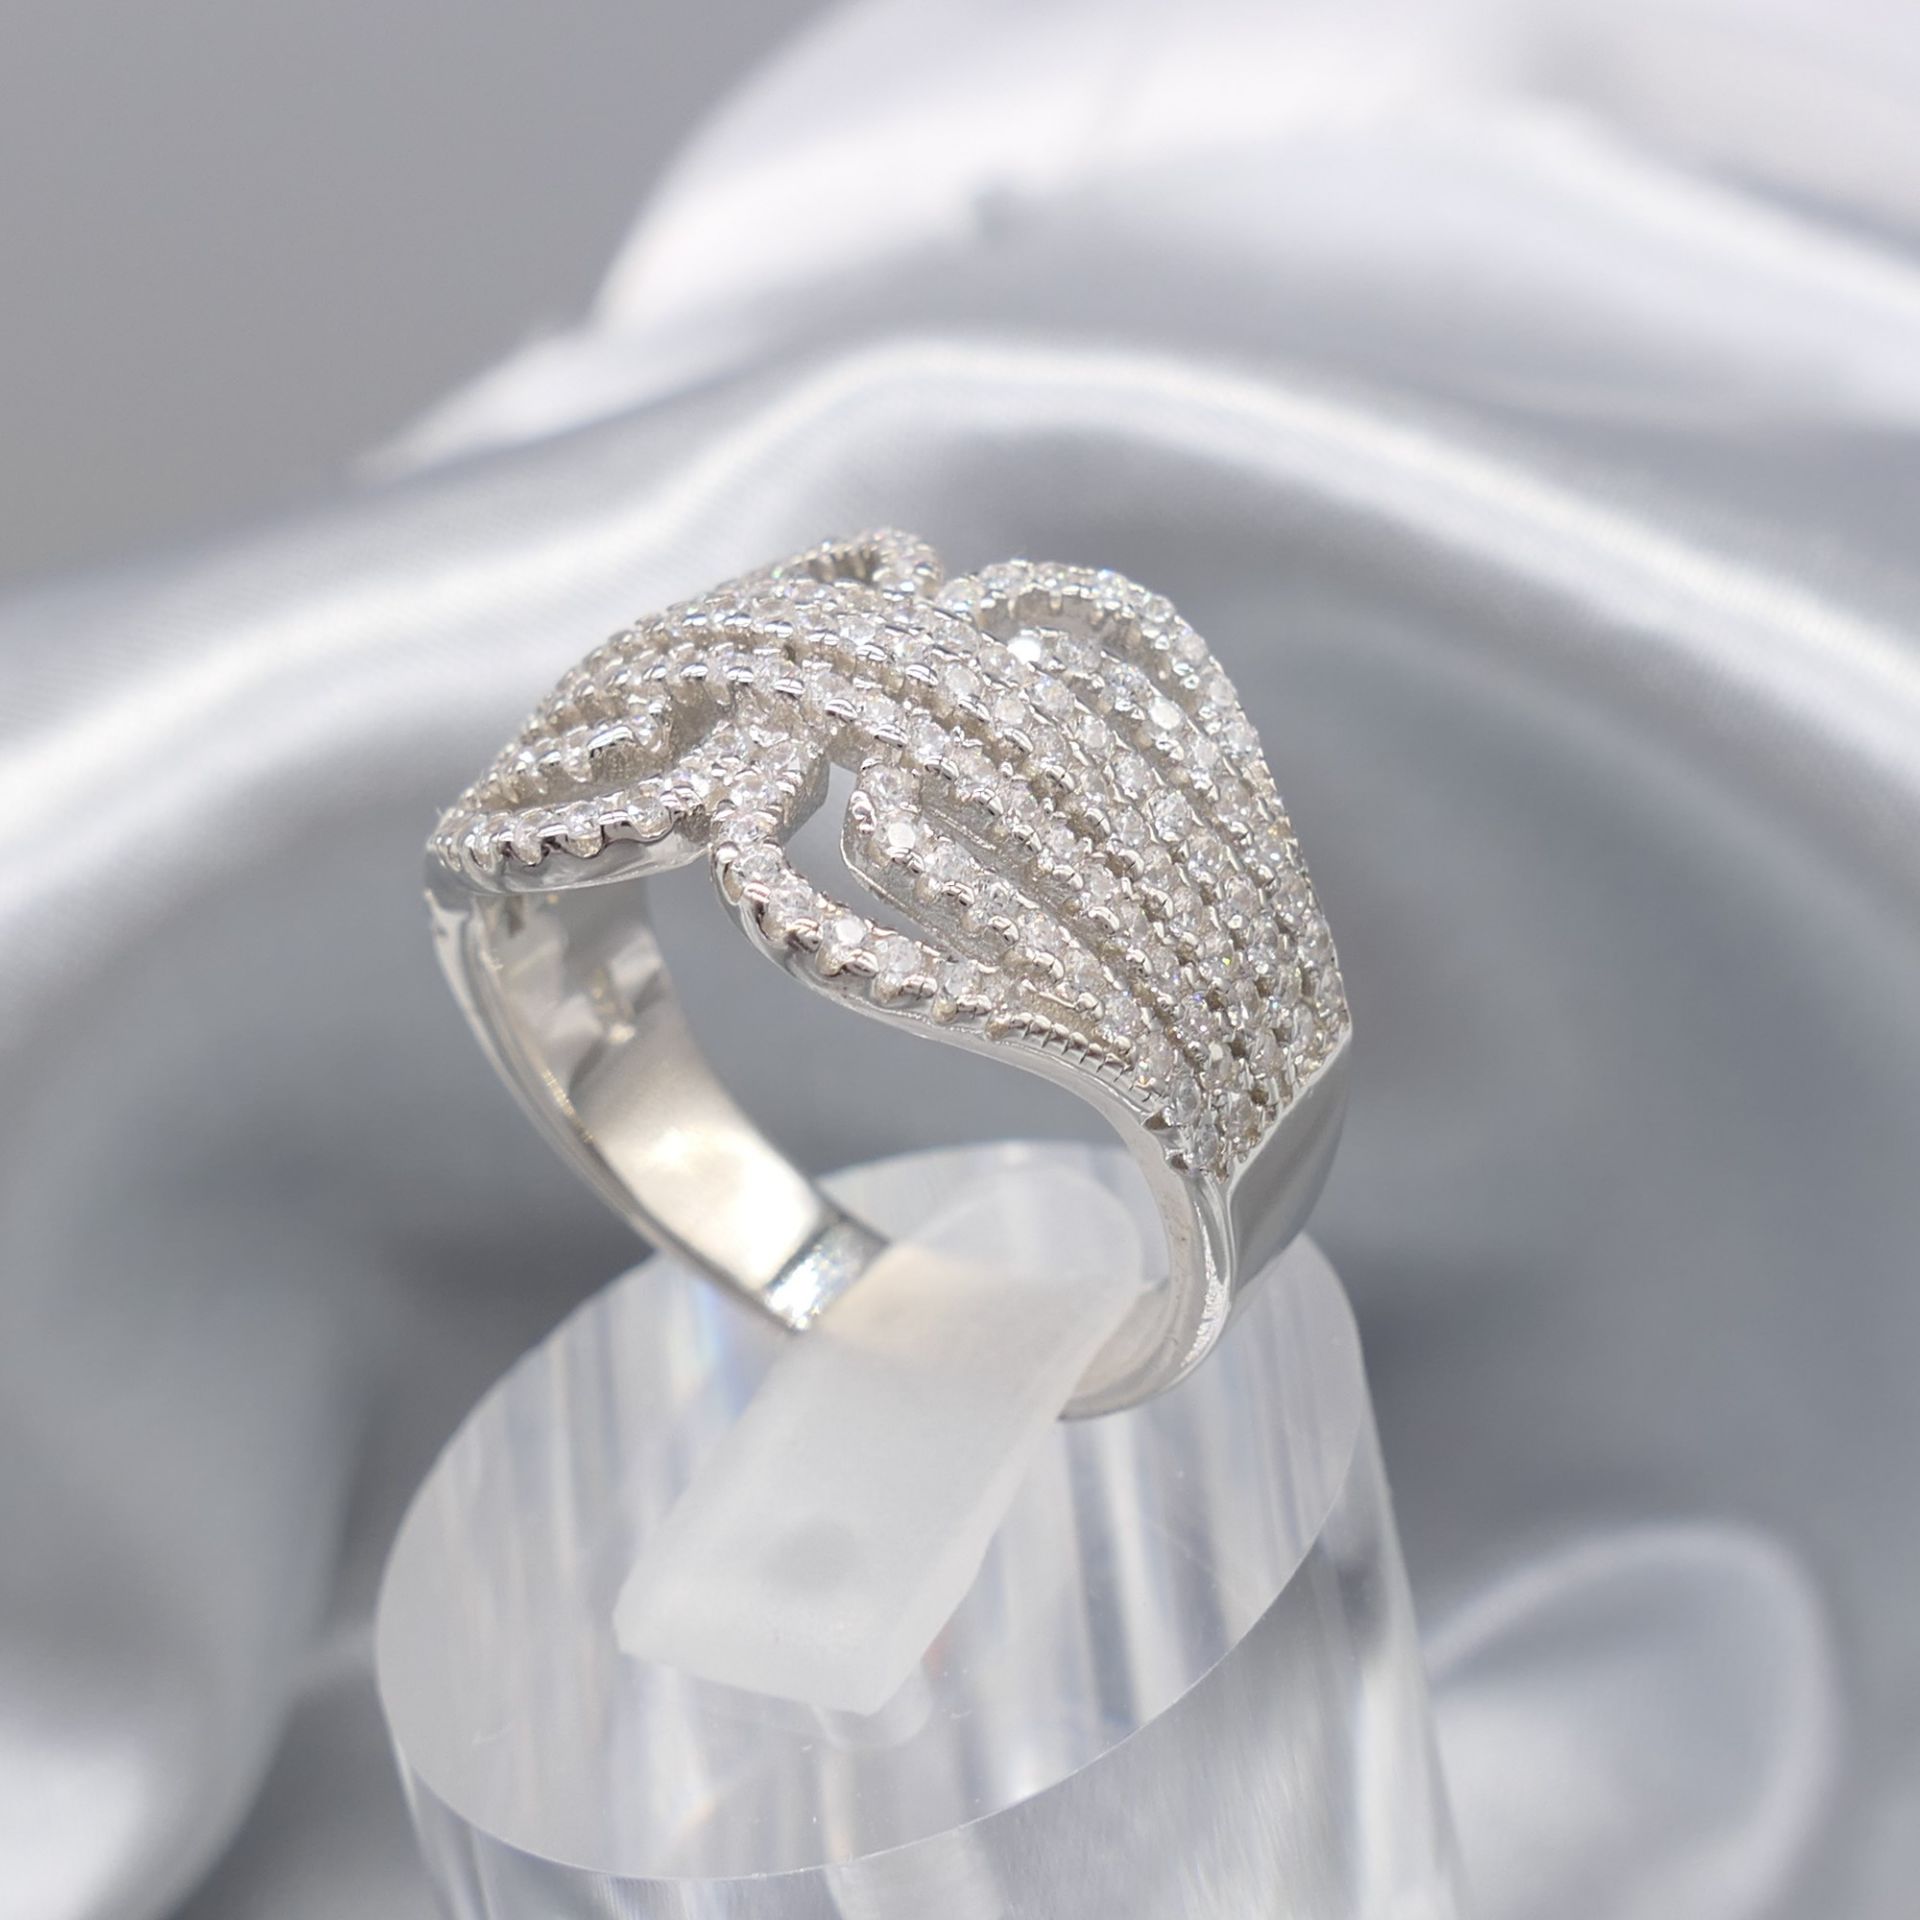 Sterling Silver Belt-Like Dress Ring With White Cubic Zirconia Stones - Image 3 of 5